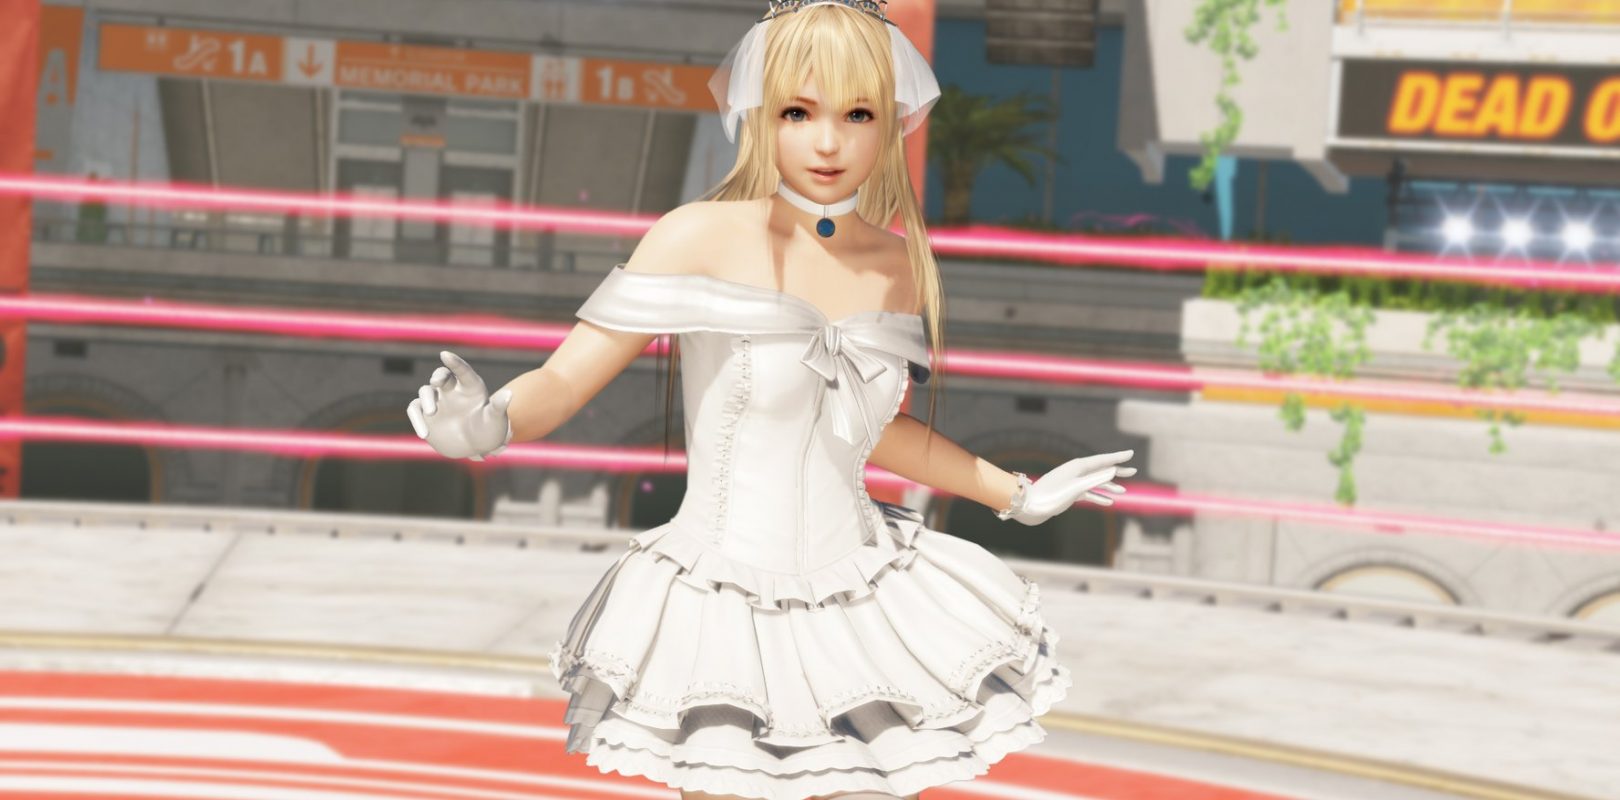 dead or alive 6 deluxe costumes